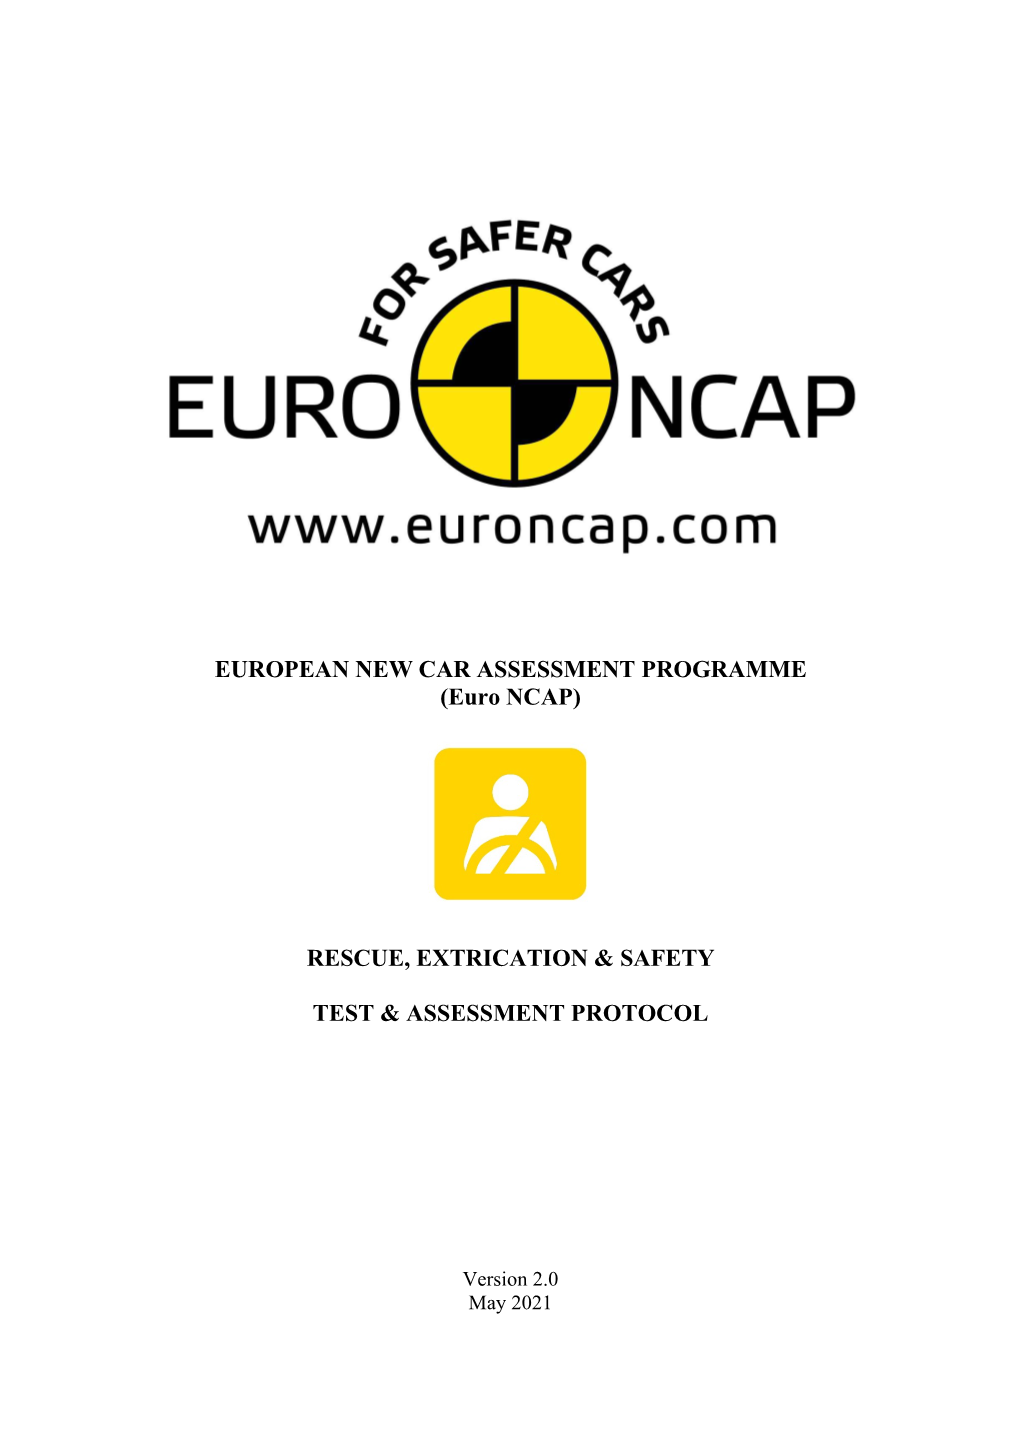 Euro NCAP Rescue, Extrication & Safety Test and Assessment